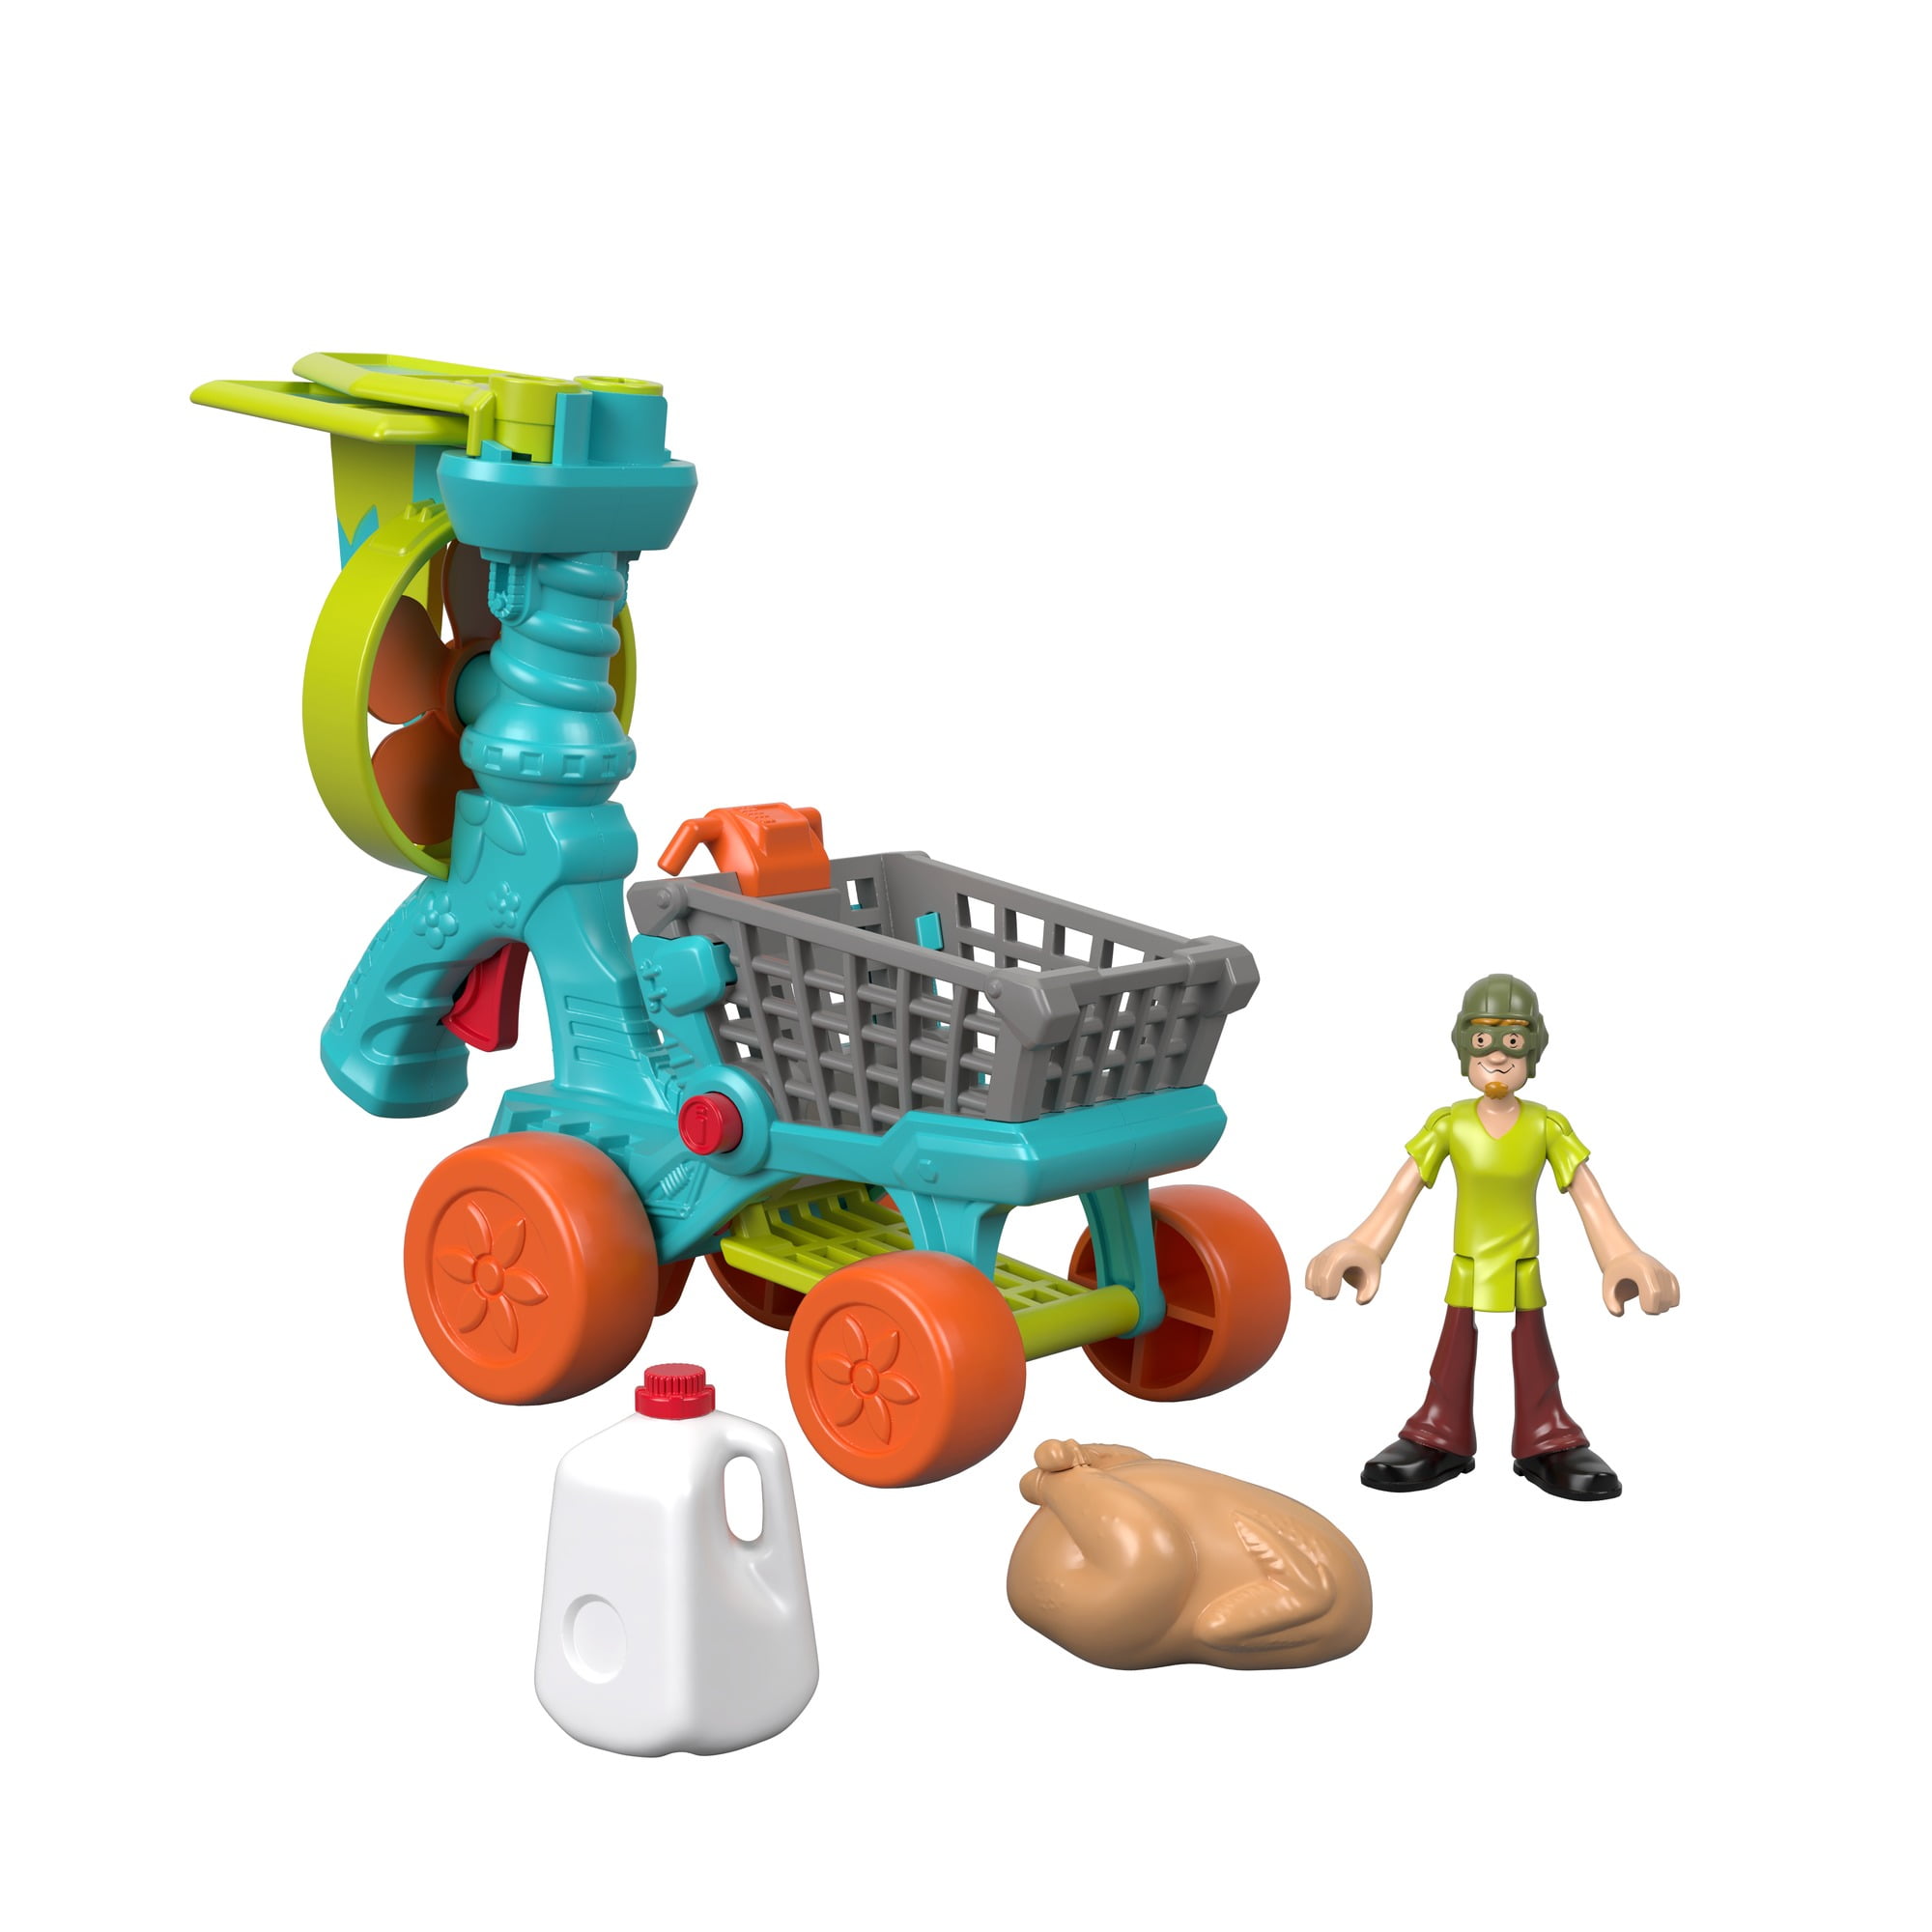 Imaginext Scooby Doo Shaggy & Dune Buggy Vehicle Play Set 2018 NRFP for sale online 